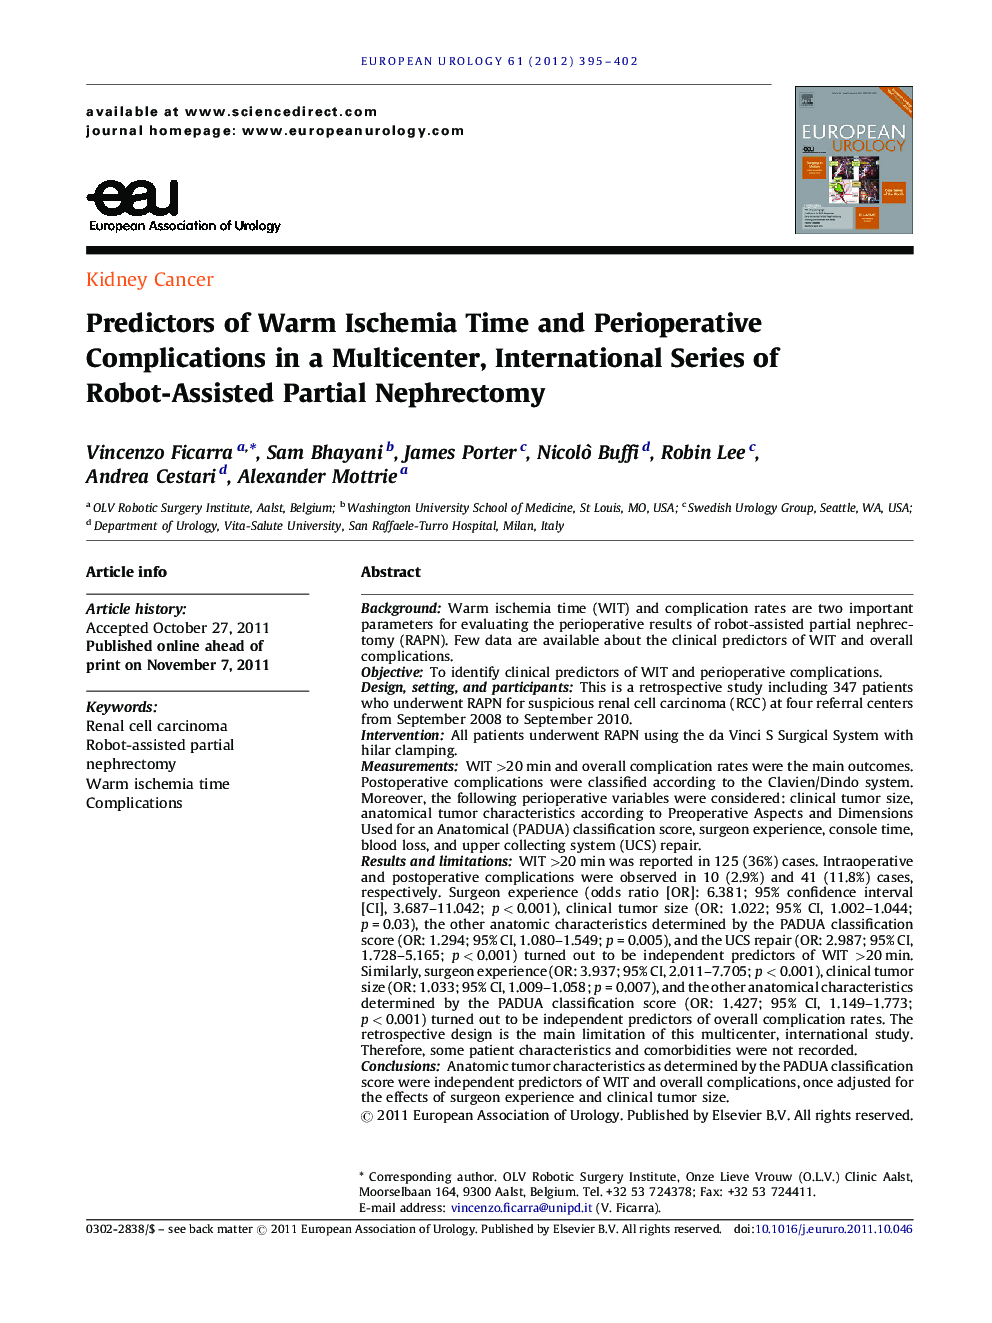 Predictors of Warm Ischemia Time and Perioperative Complications in a Multicenter, International Series of Robot-Assisted Partial Nephrectomy